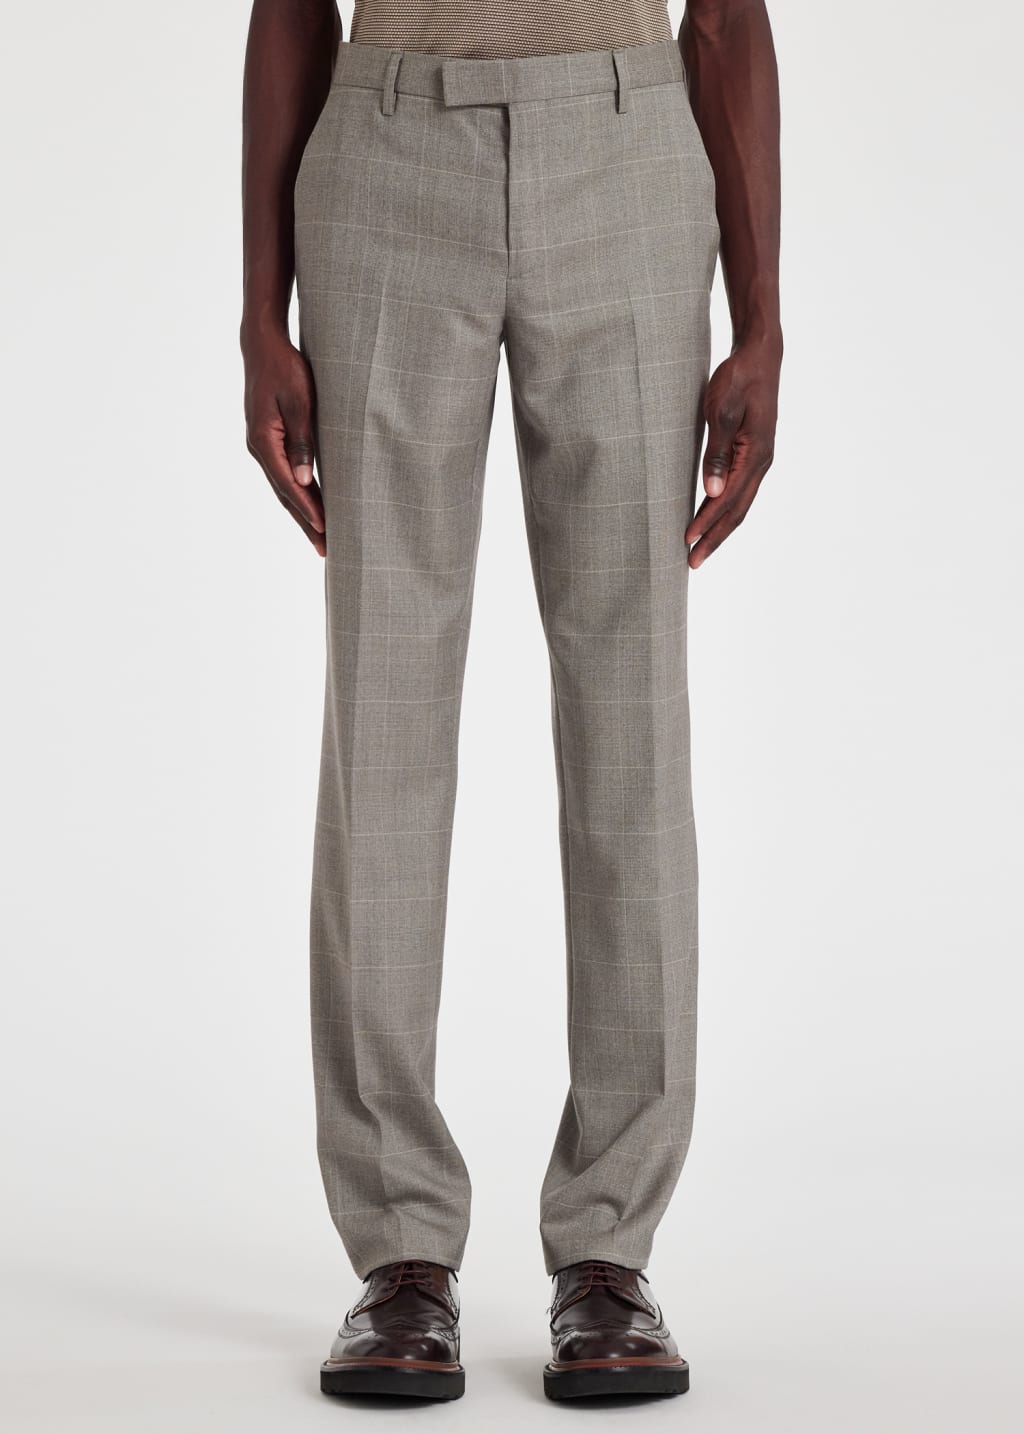 Model View - Tailored-Fit Grey Multi-Check Wool Buggy-Lined Suit by Paul Smith